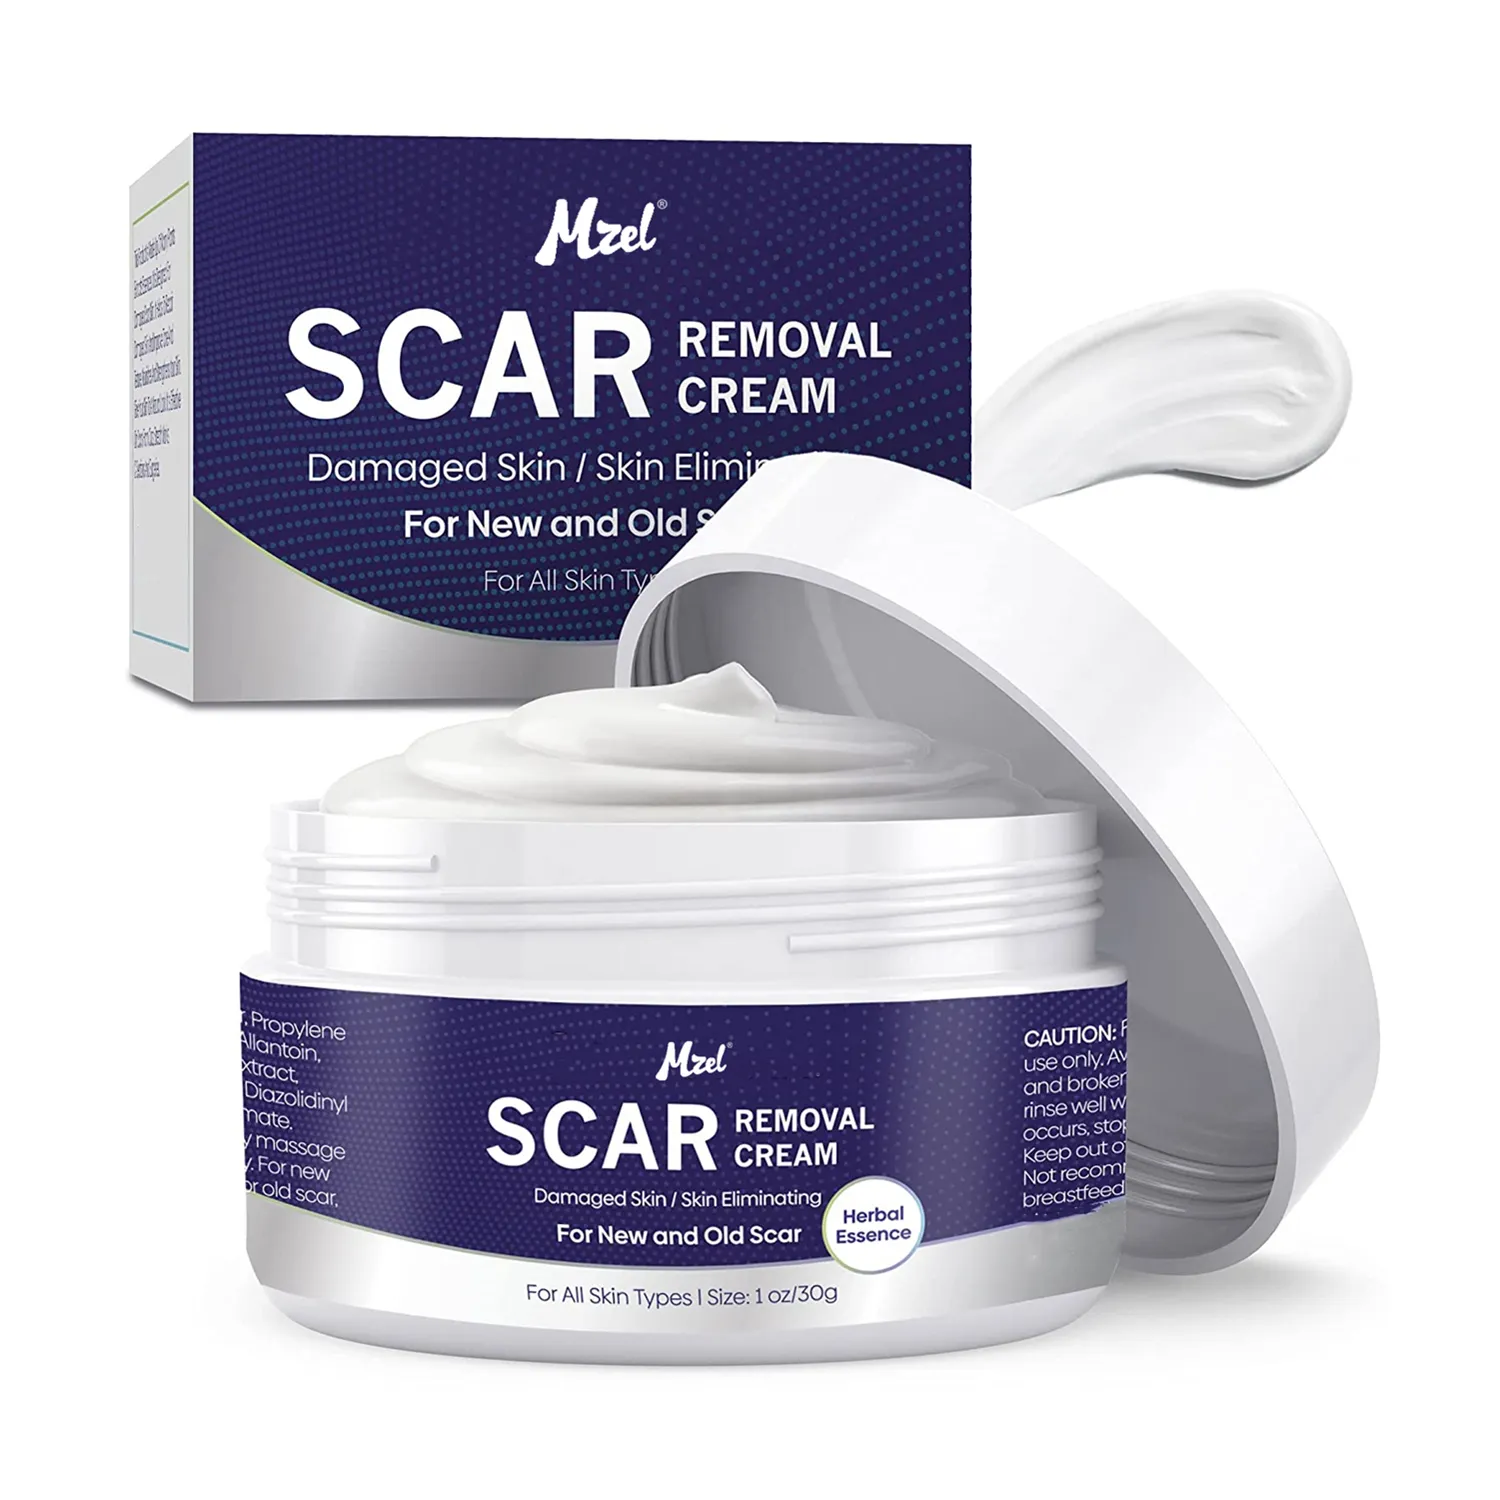 100% Silicone Effective Scar and Acne Remover Cream for both Old and New Scars Stretch Marks Burns